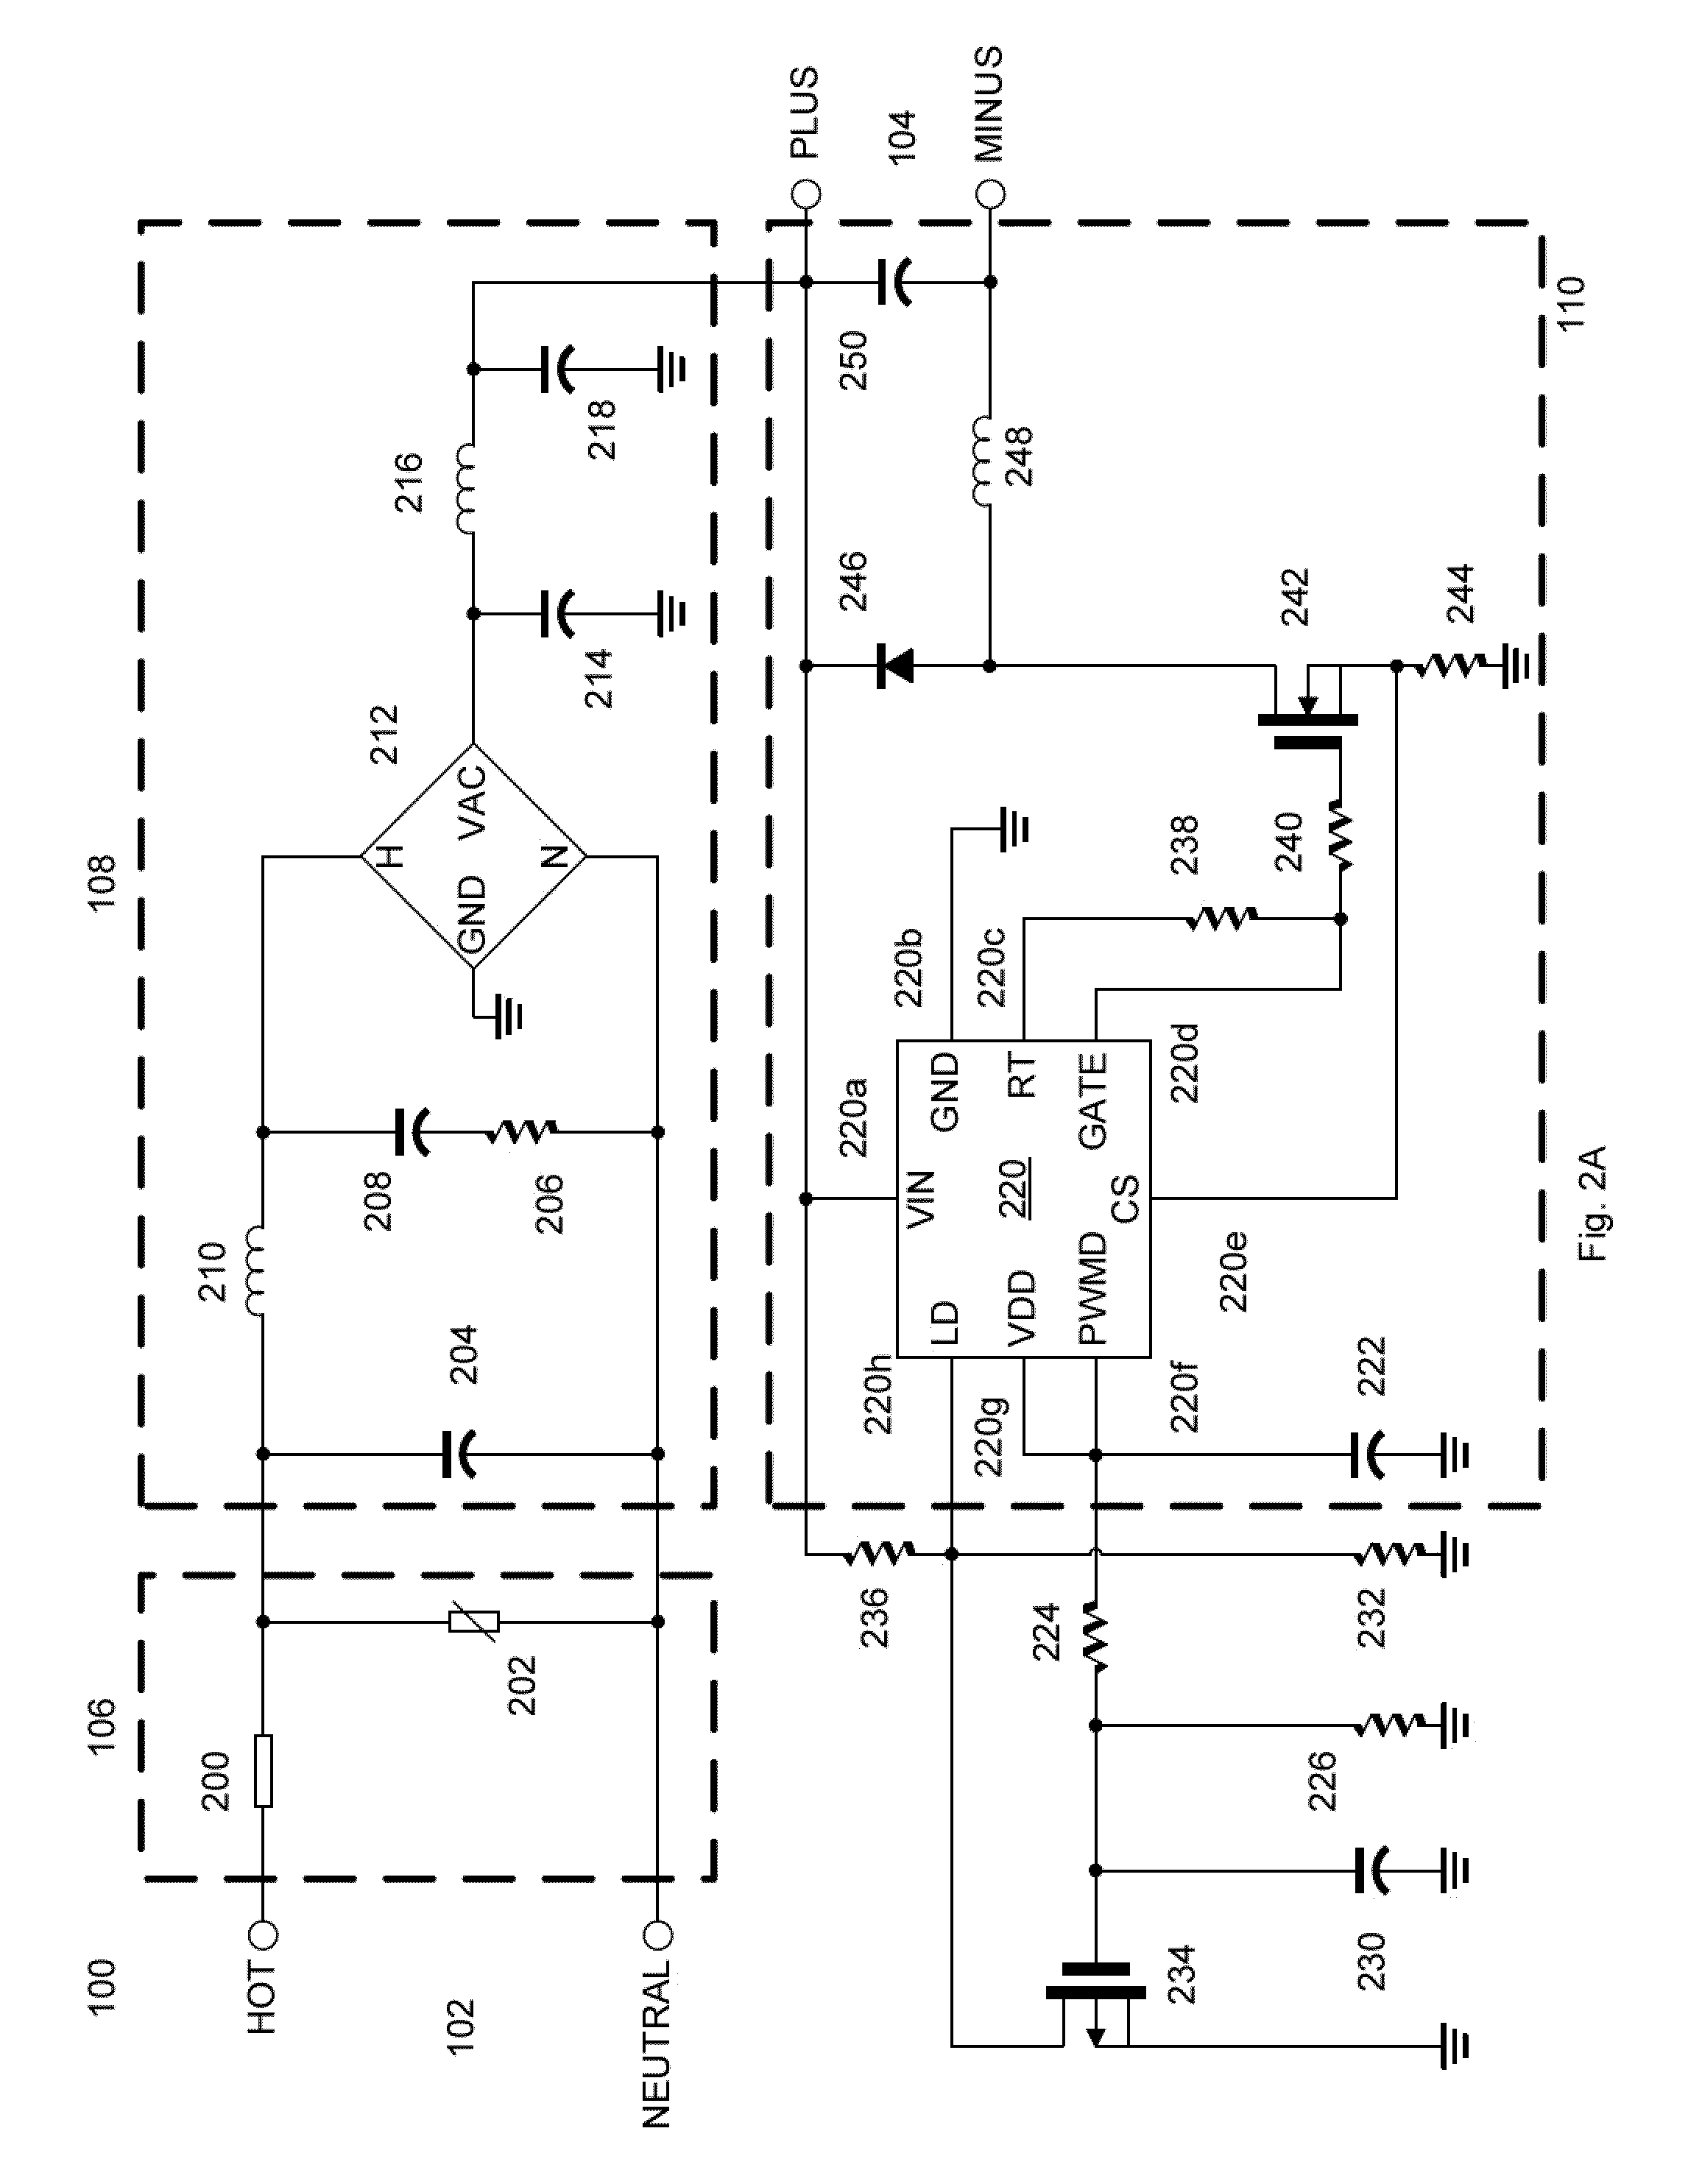 Thermal protection circuit for an LED bulb